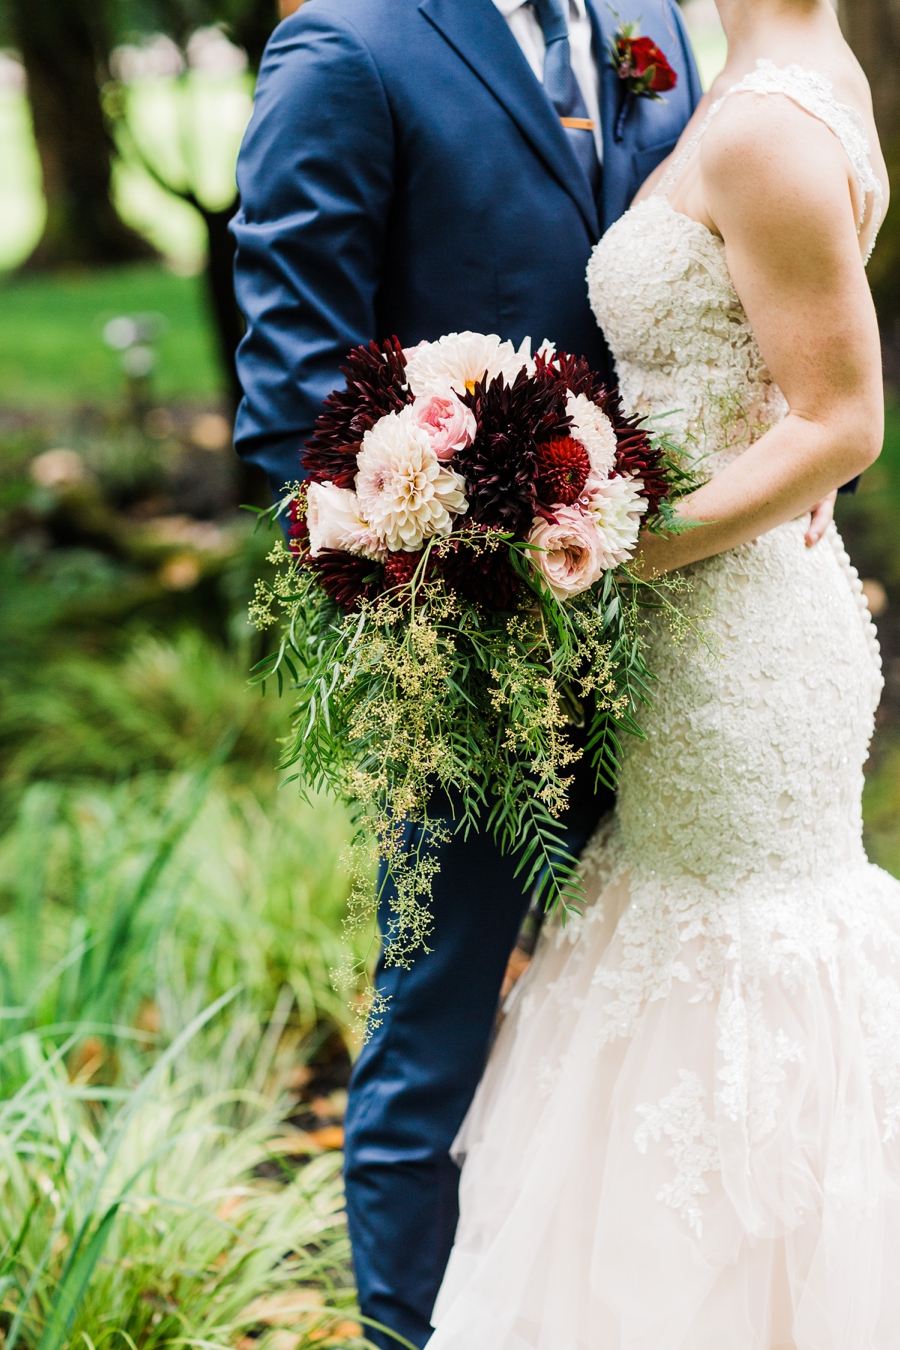 Pink and burgundy bridal bouquet at a Maroni Meadows wedding in Snohomish captured by Seattle wedding photographer Amy Galbraith